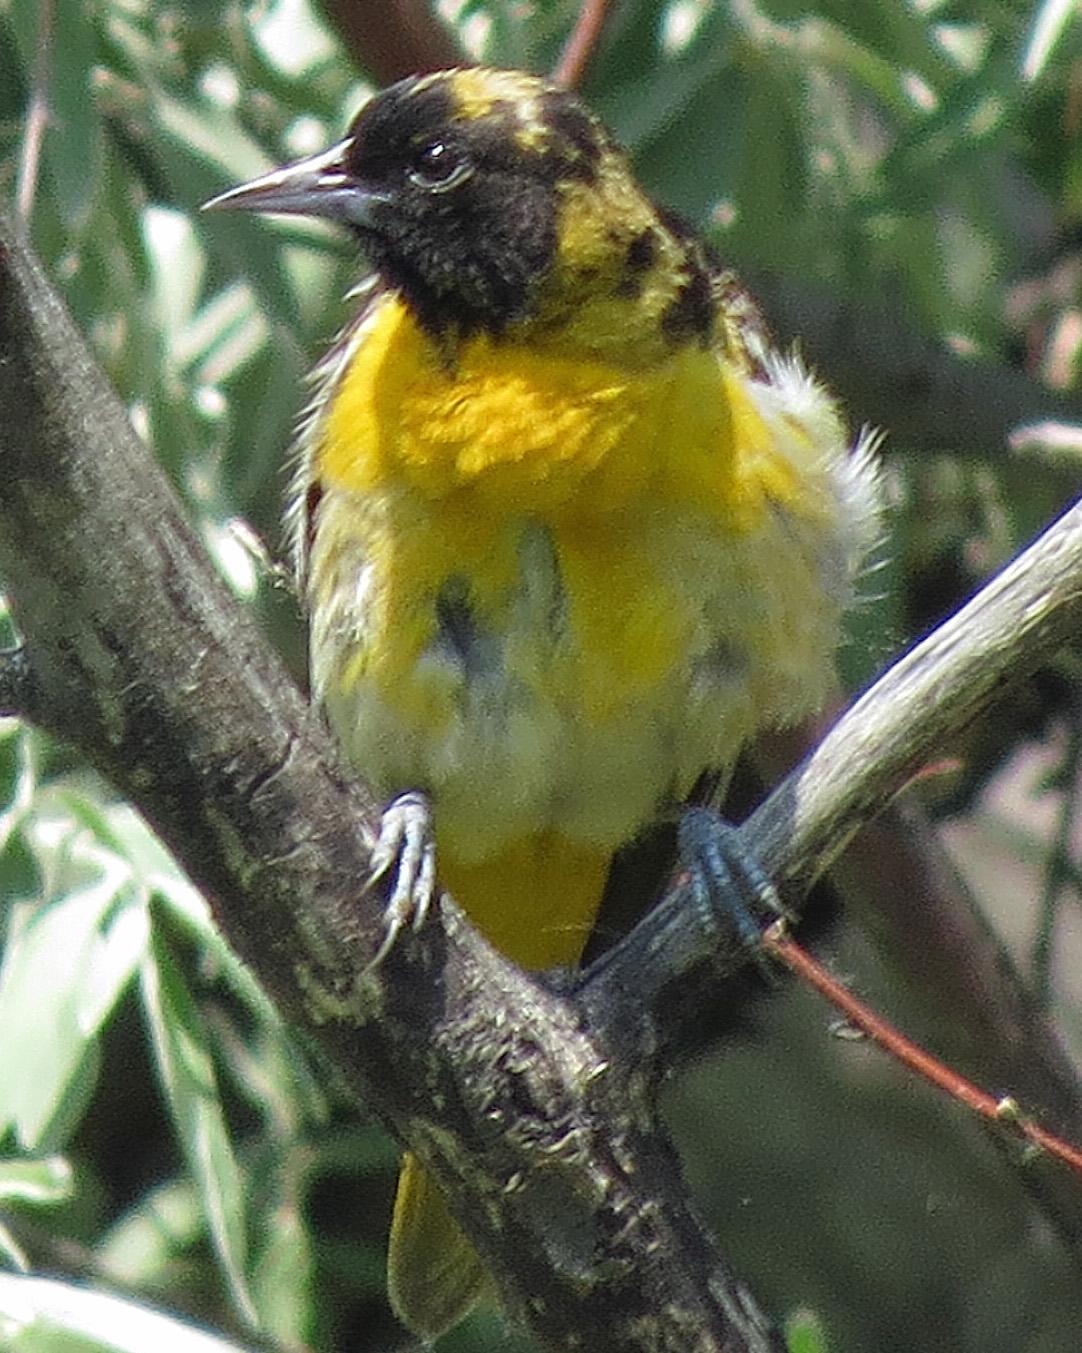 Orchard Oriole Photo by Kelly Preheim